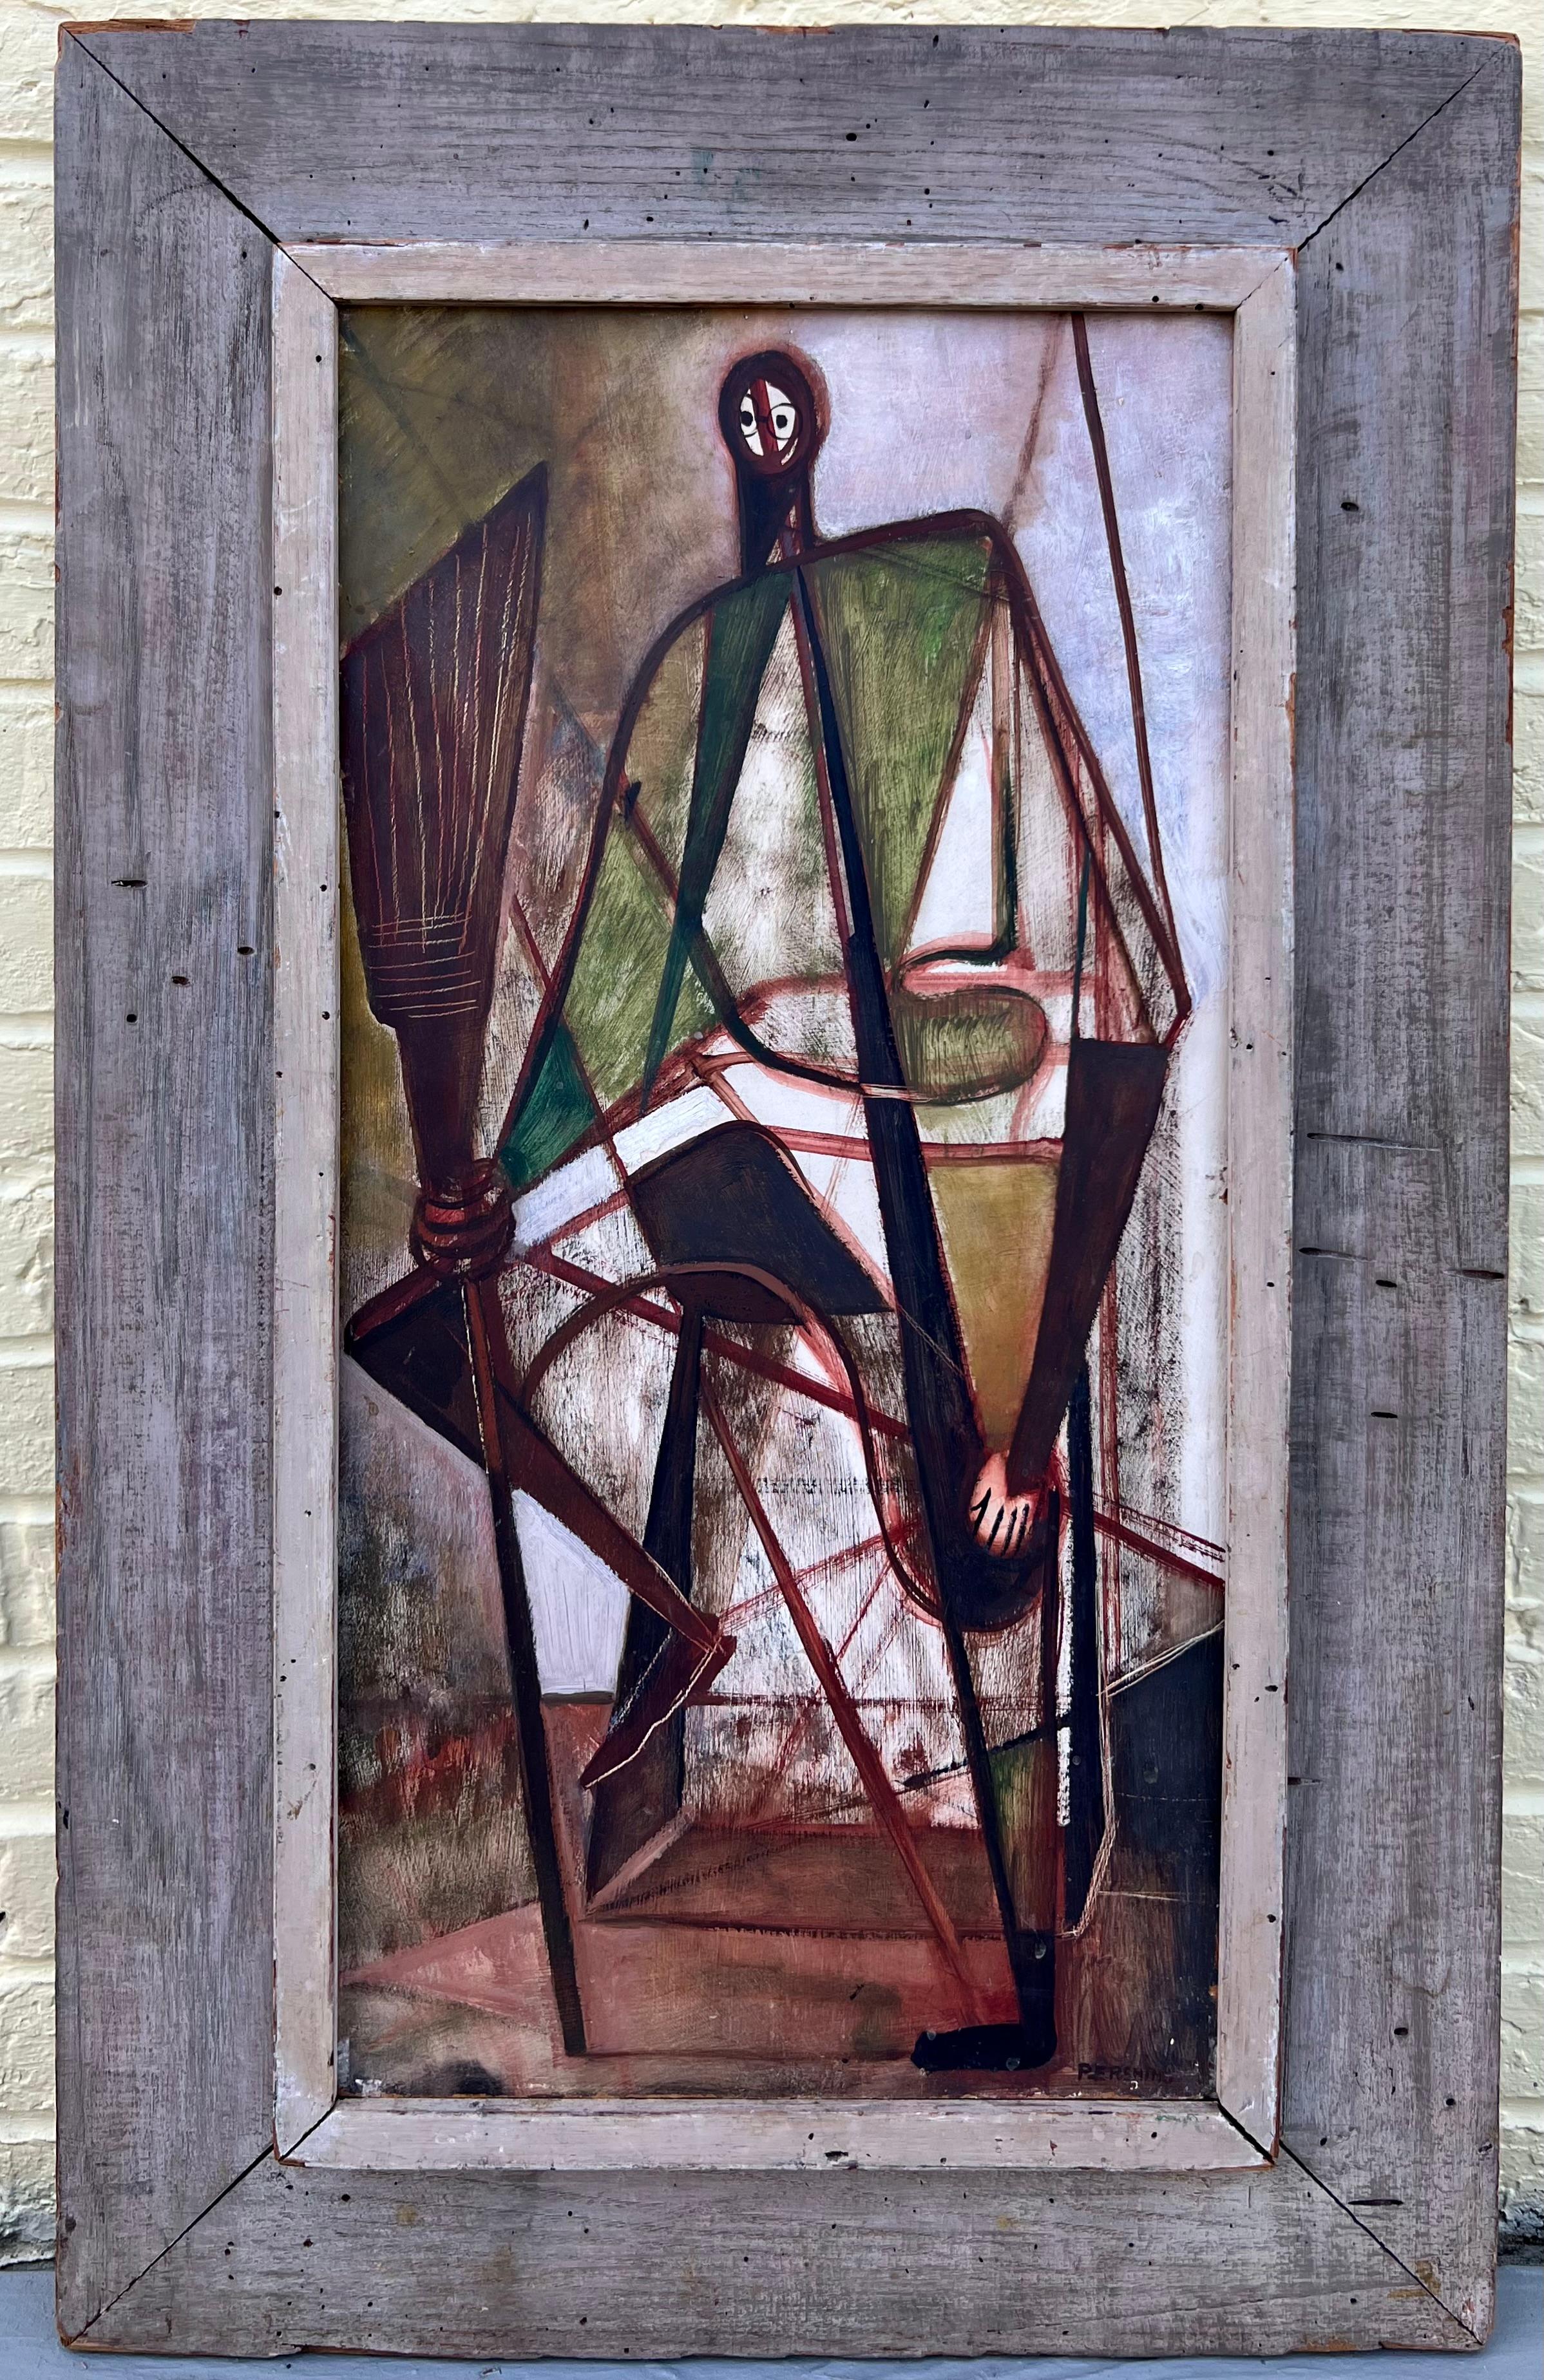 Mid-century cubist oil on masonite signed in the lower right. Presented in what is most likely its original frame and presents well. Original label from Contemporary Arts on E 57th in NYC on stretcher. This painting probably dates from the 1940s.